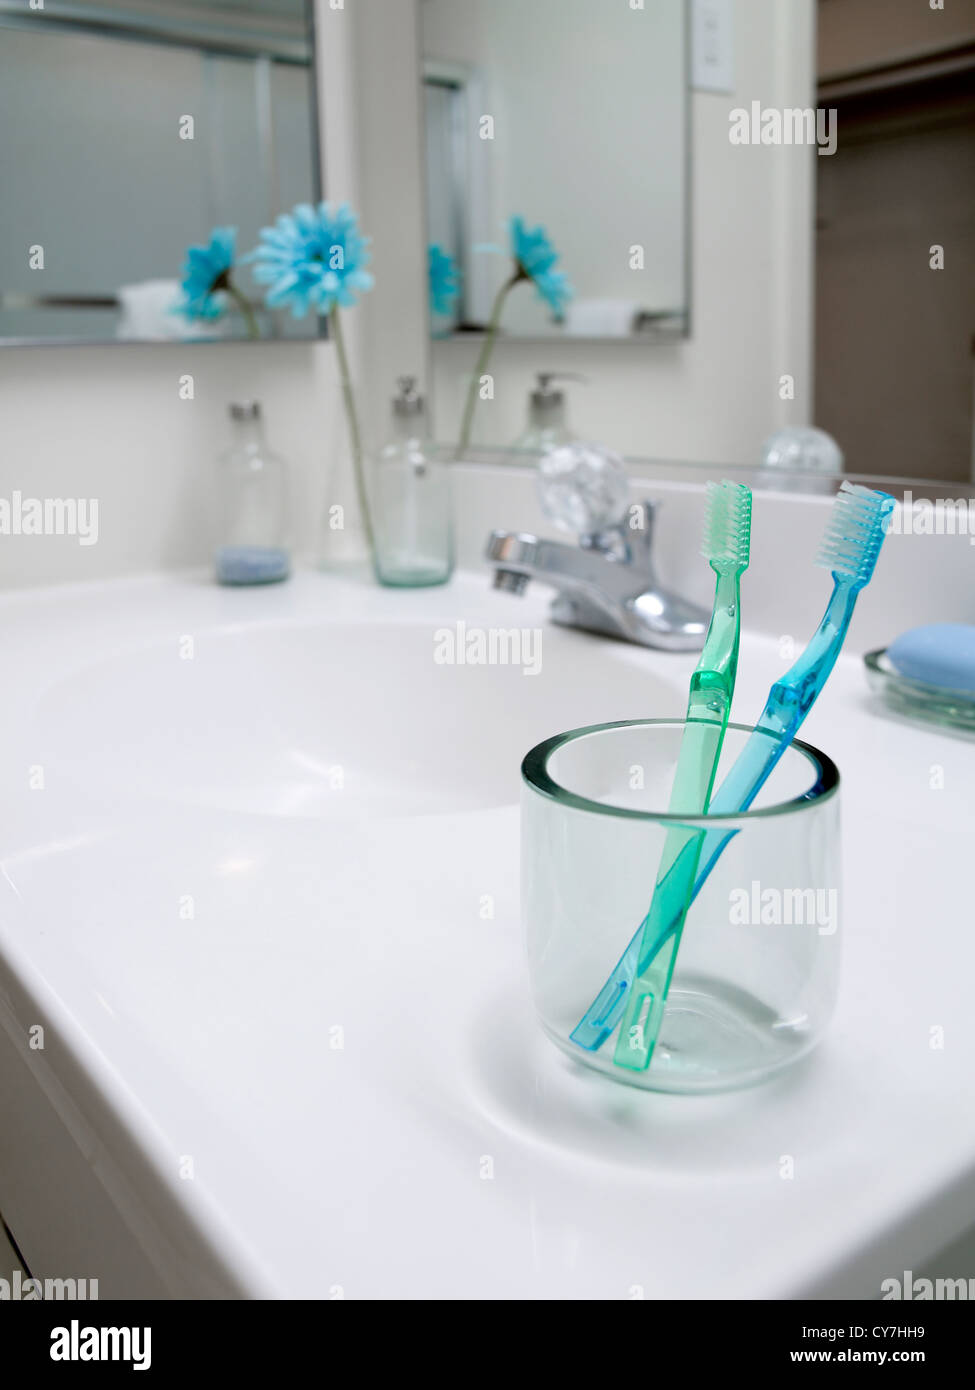 Toothbrushes In Glass In Bathroom Stock Photo